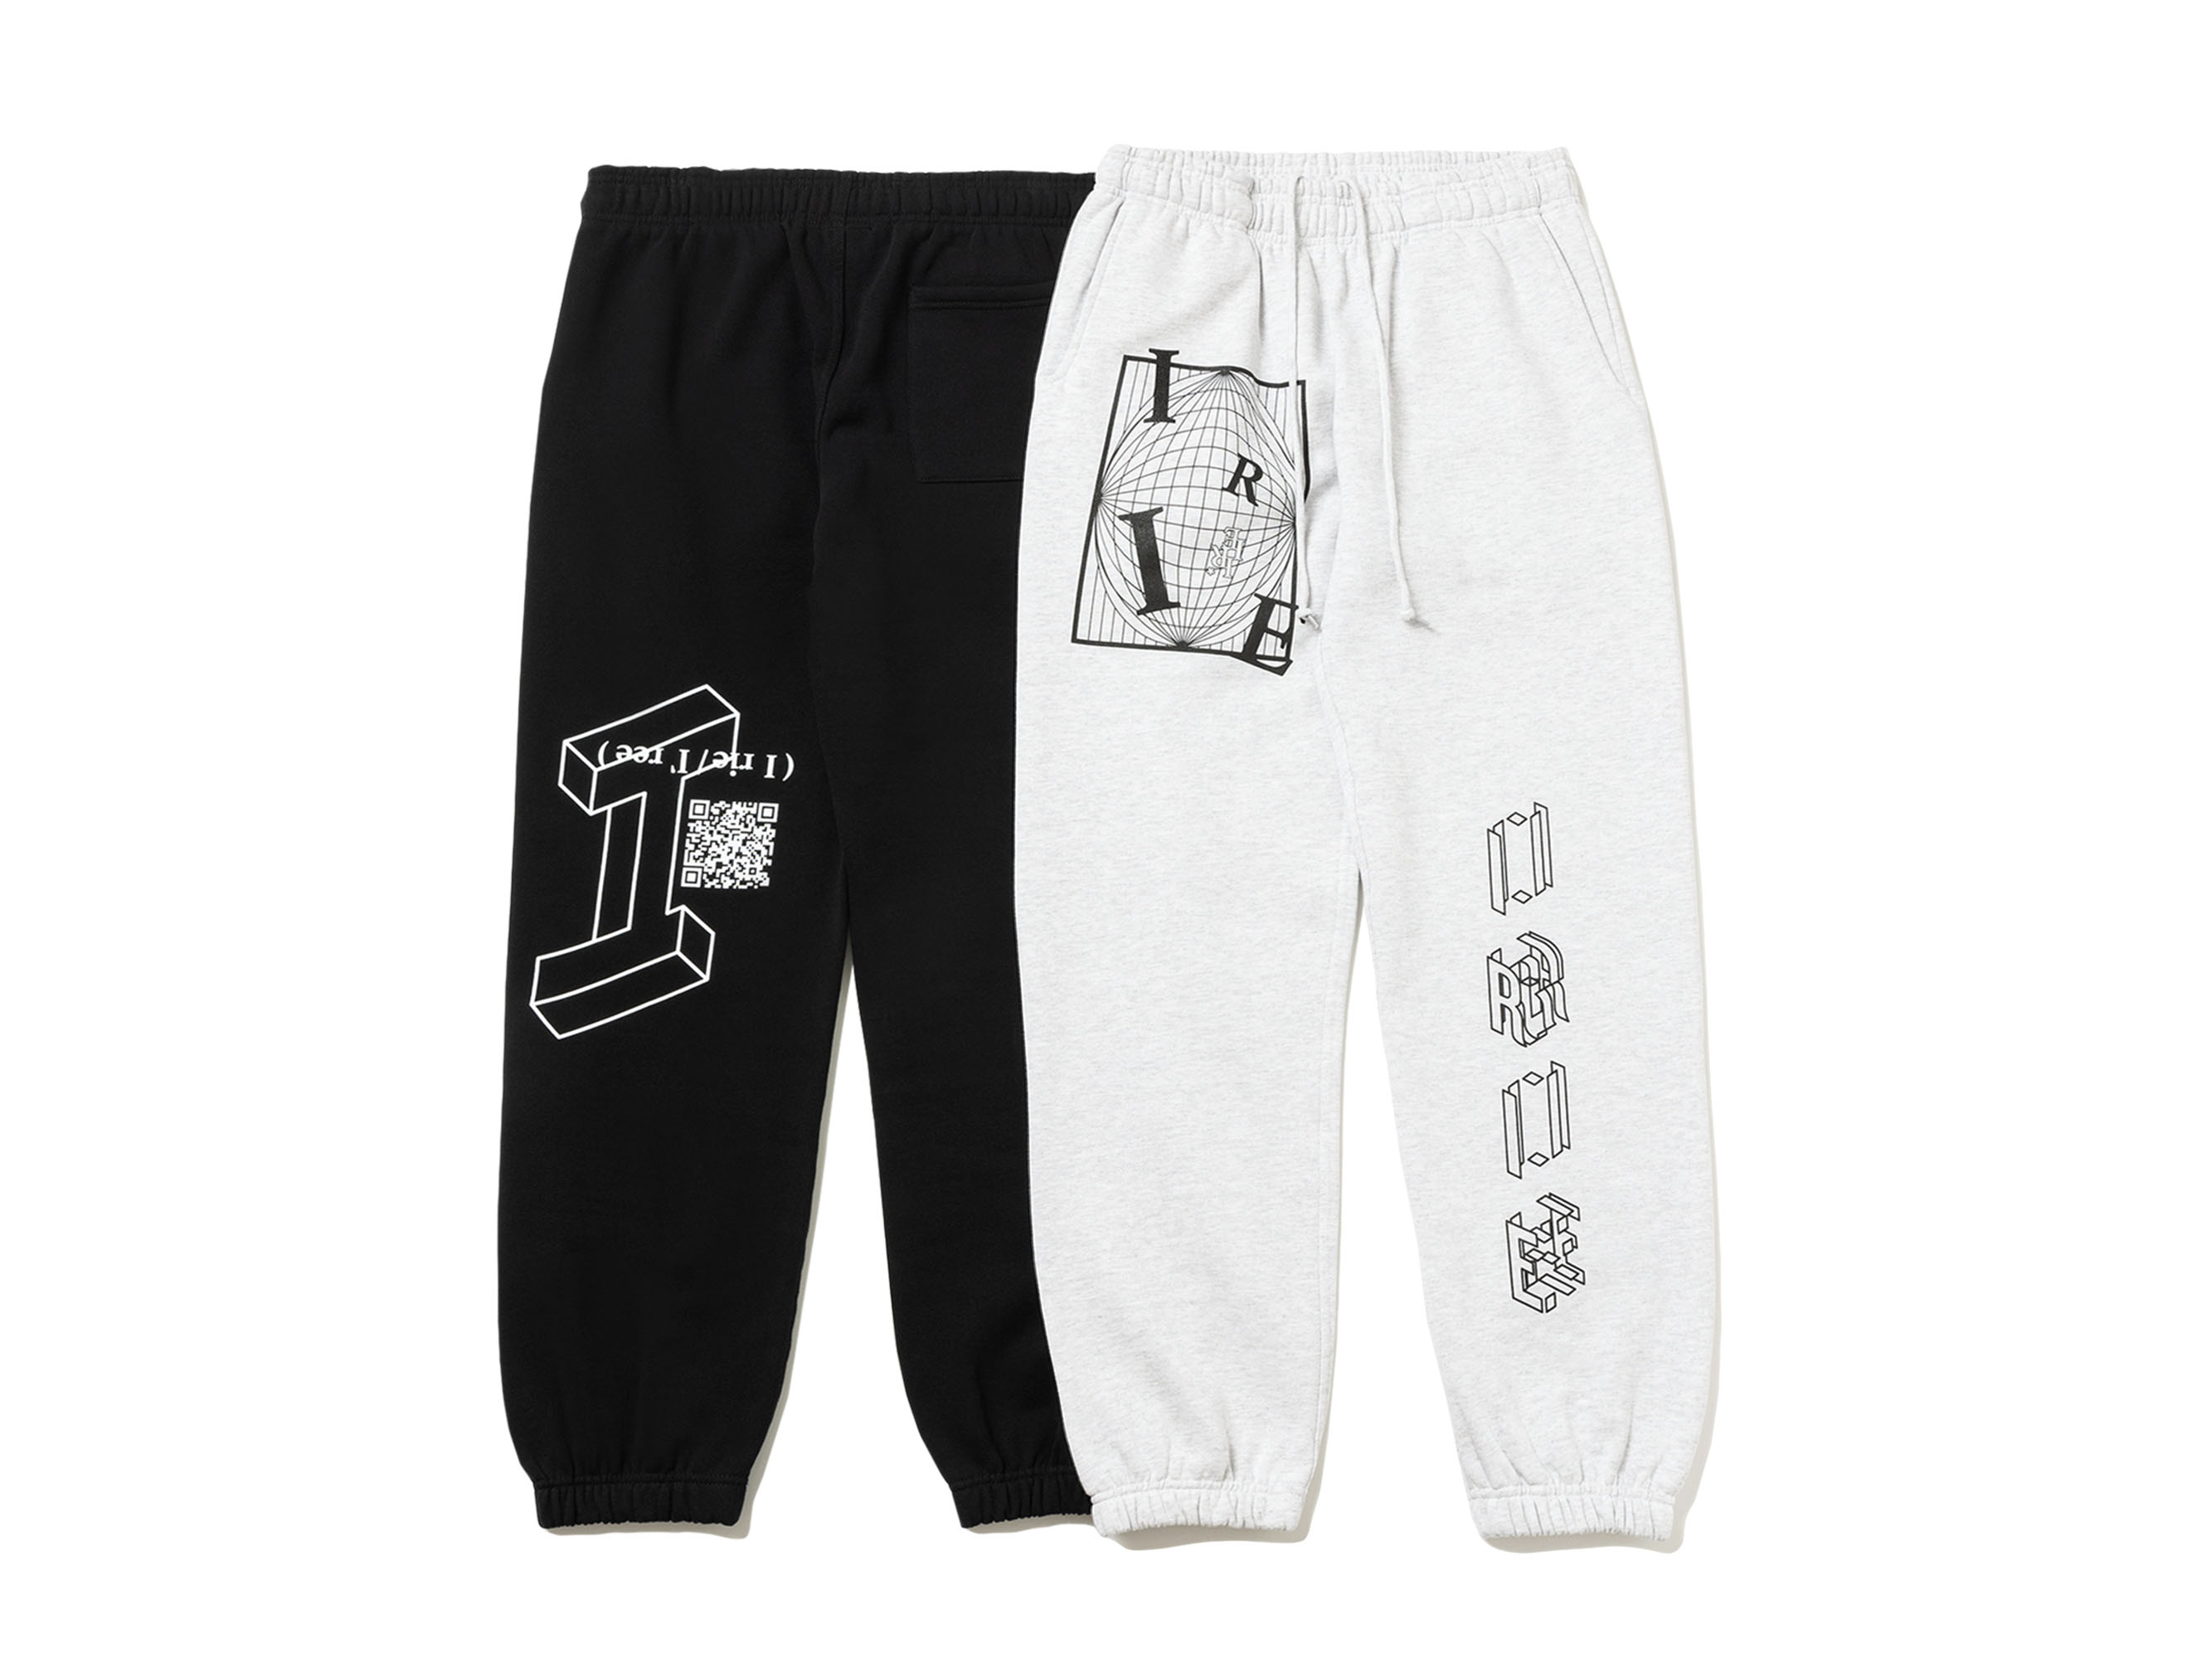 OPTICAL ILLUSION SWEAT PANTS - IRIE by irielife